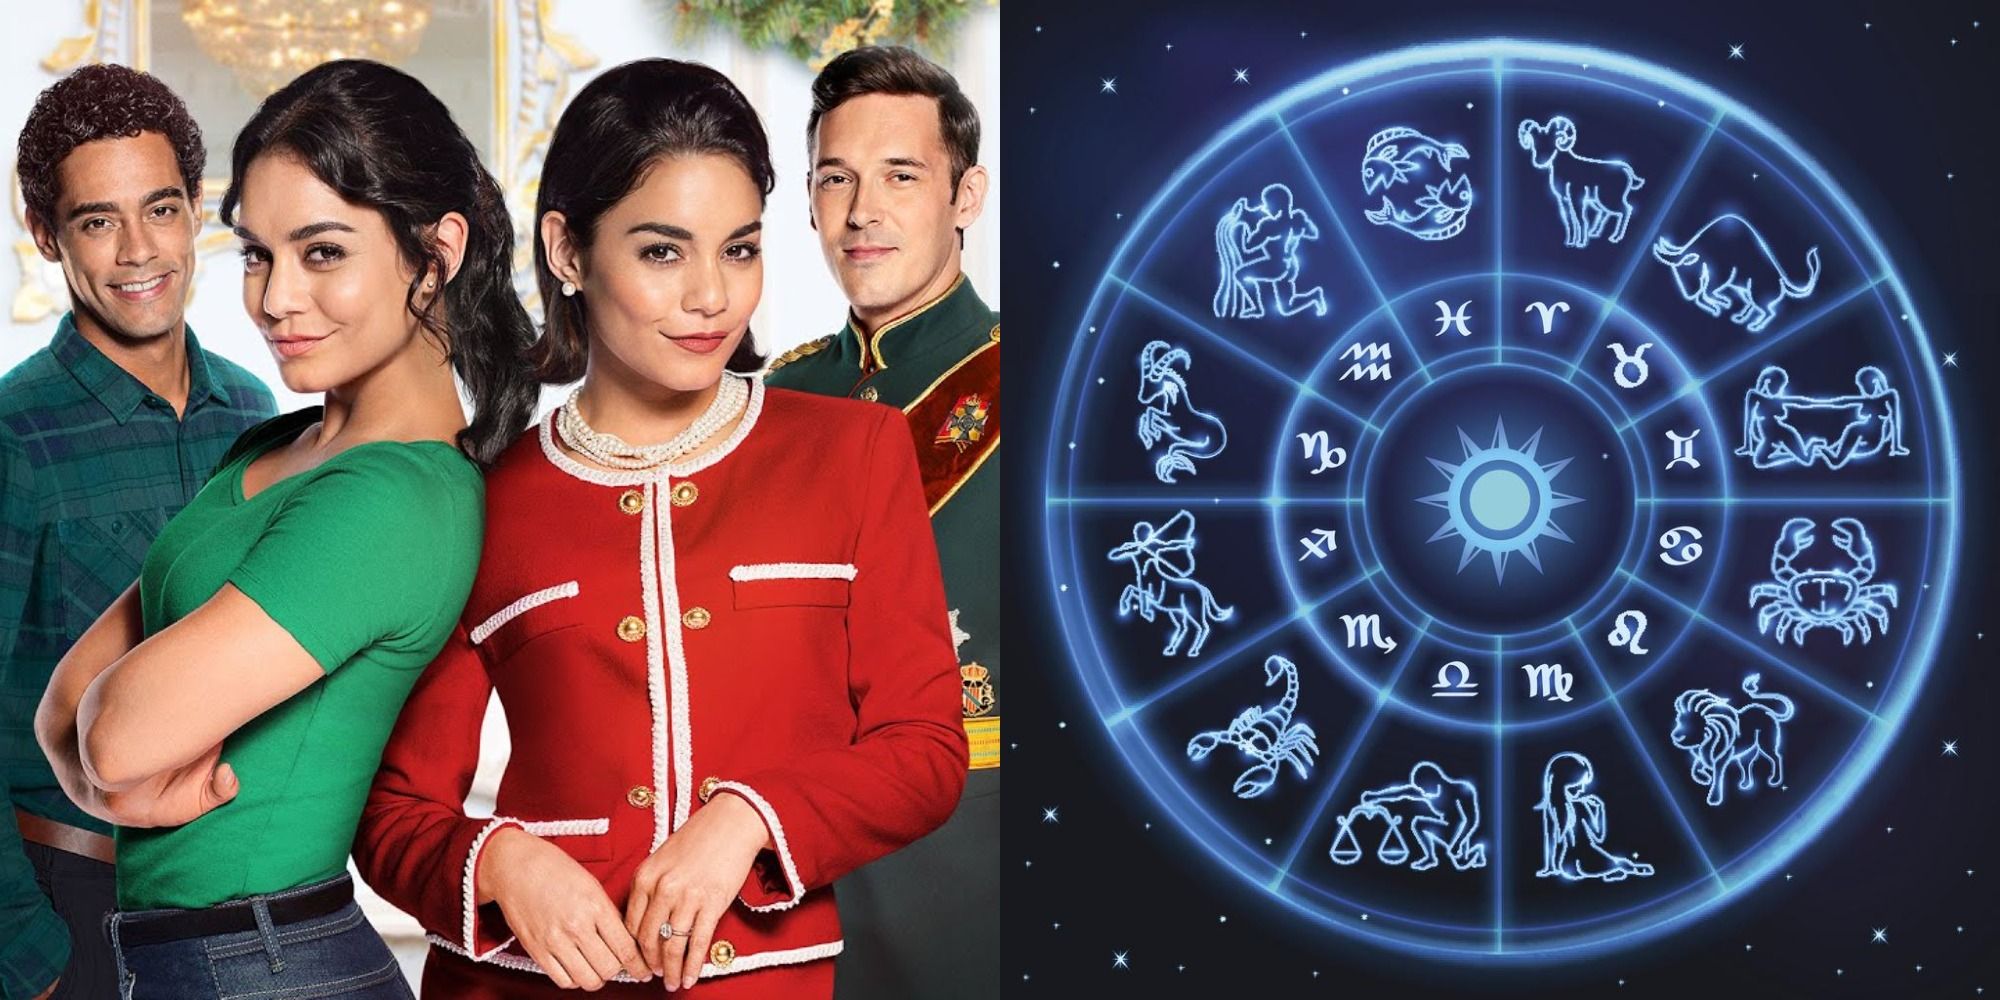 Split image showing the cast of The Princess Switch and a zodiac wheel